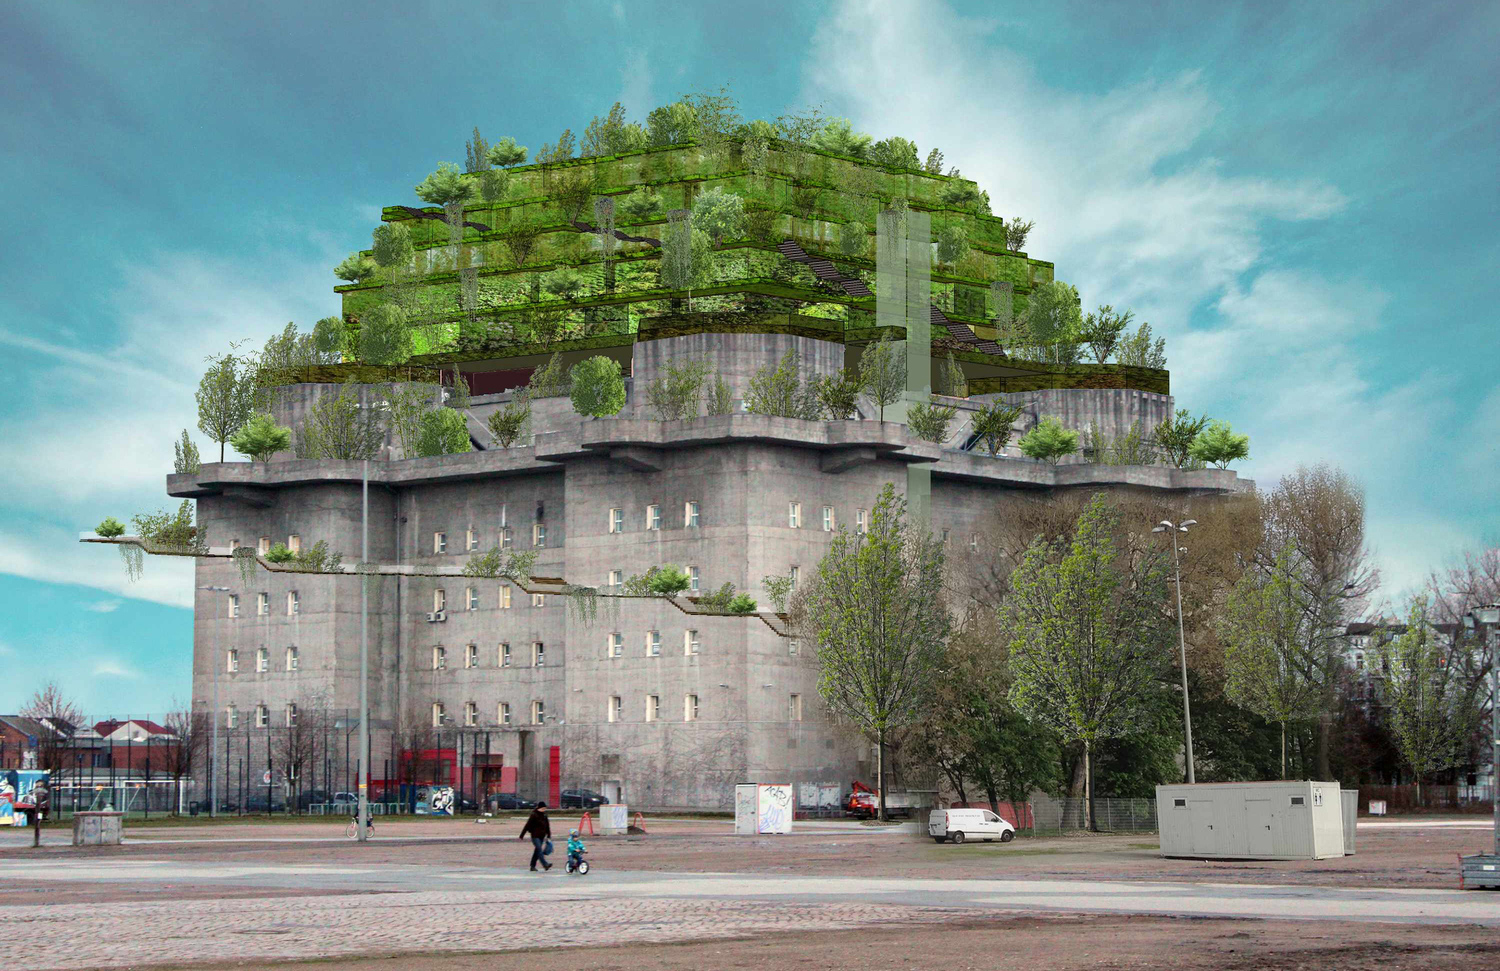 Hamburg WWII bunker to become a ‘green mountain’